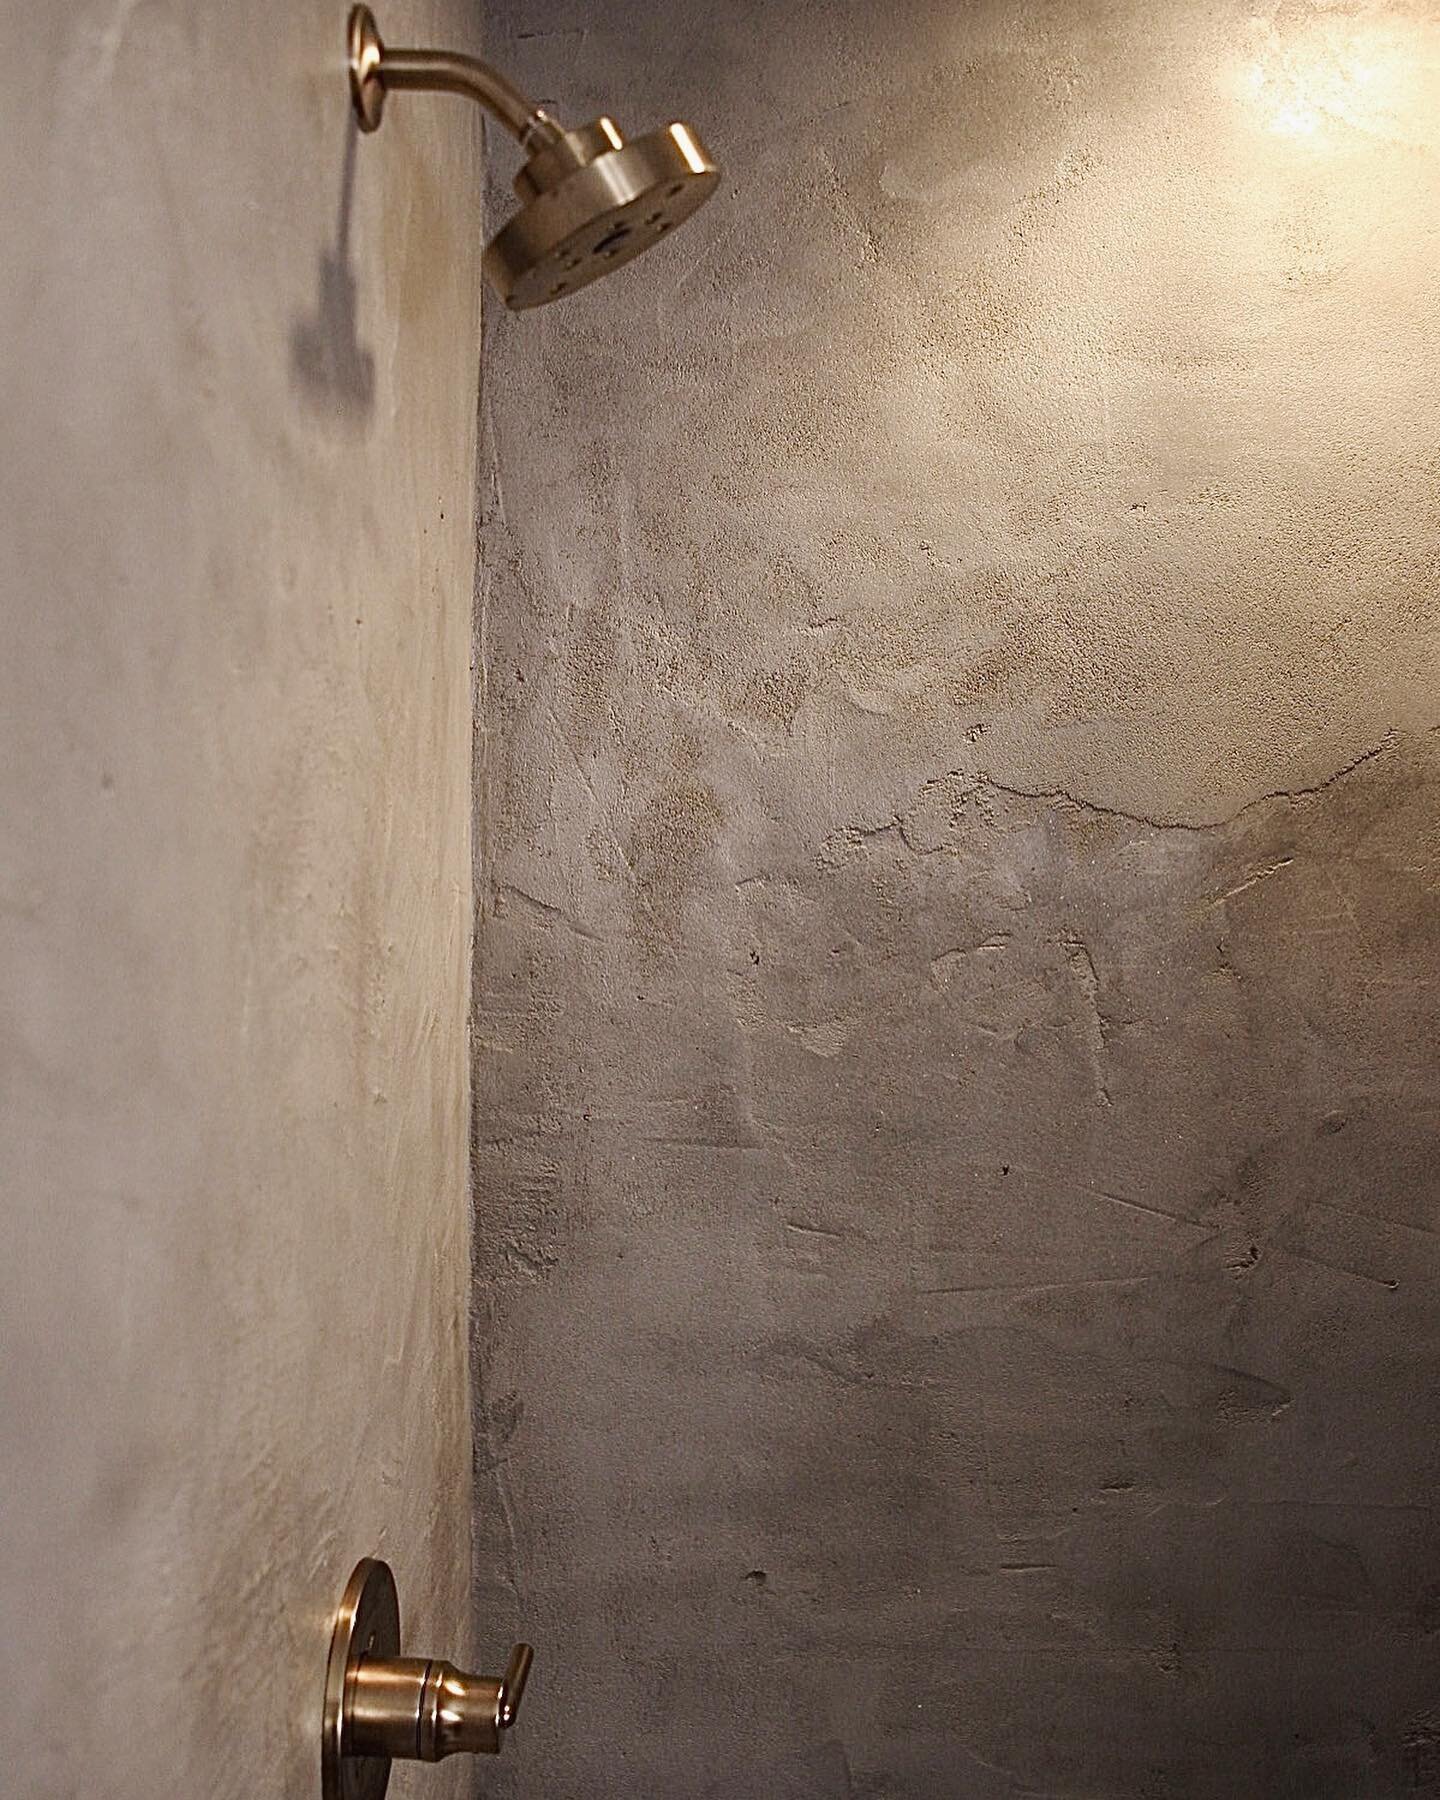 A concrete shower - we tested this &ldquo;old world&rdquo; style process in the Farmhouse Apartment - membrane, lathe and the right mortar mix. Even the shower pan is just sealed concrete. We love the texture and movement.